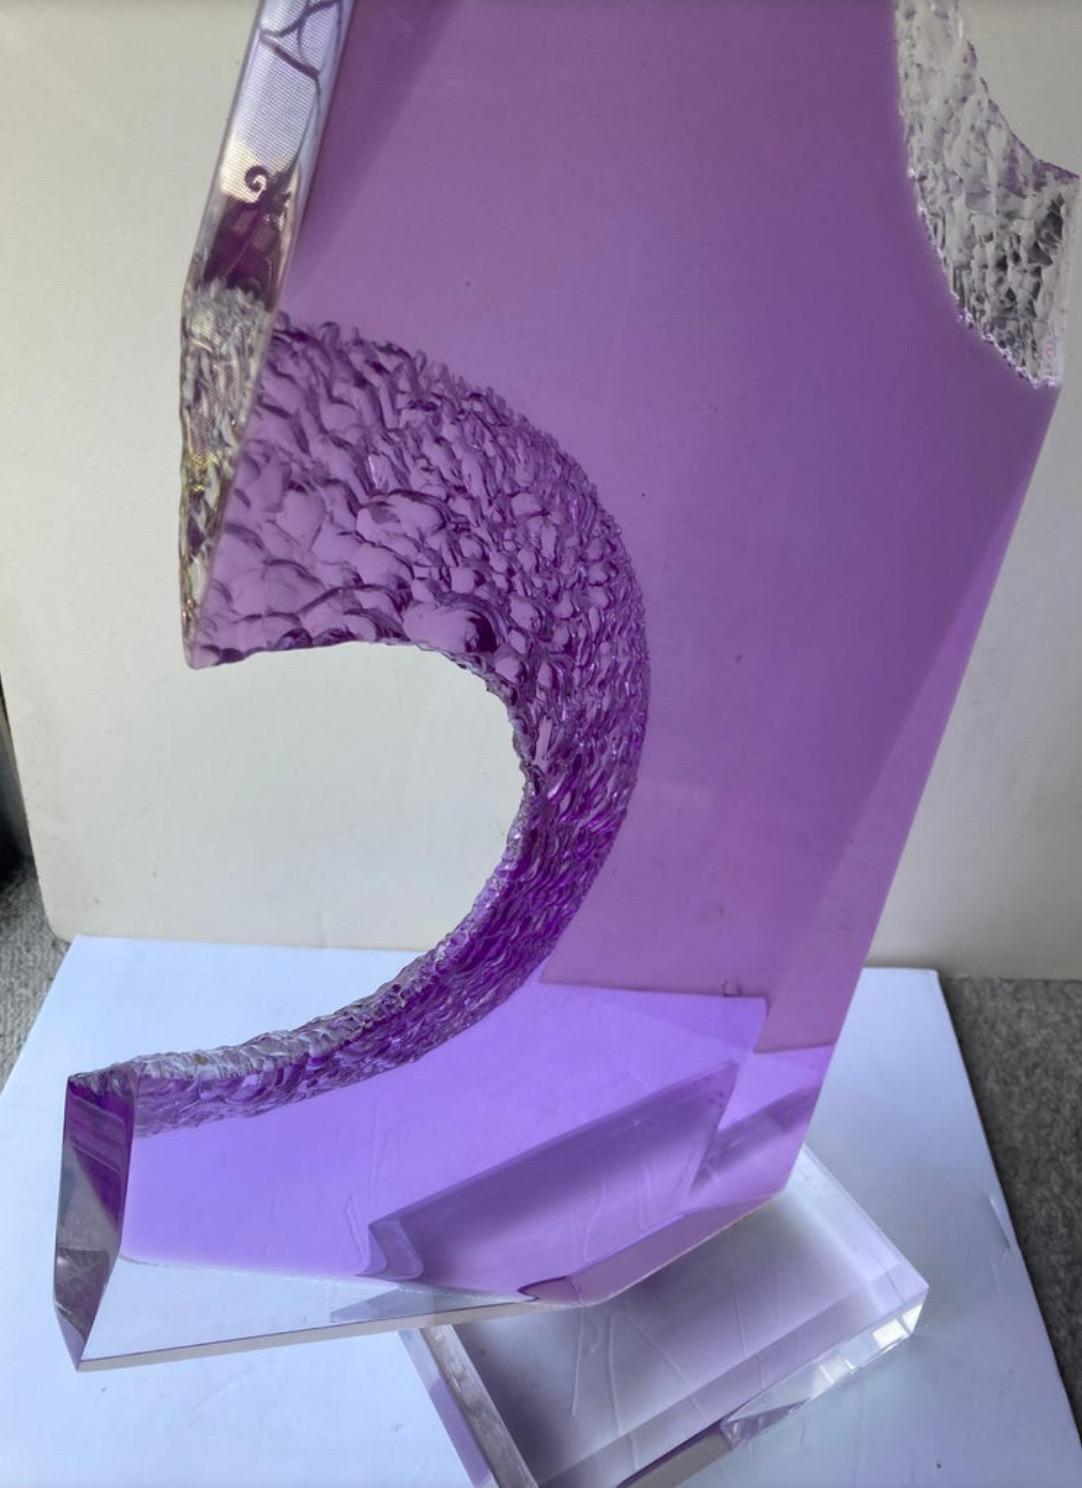 Large colorful abstract lucite sculpture by Israeli artist, Shlomi Haziza, circa early 1990s. The piece is in good vintage condition with no chips, cracks; there is some minor crazing on the piece and some scratches to the lucite on the bottom of